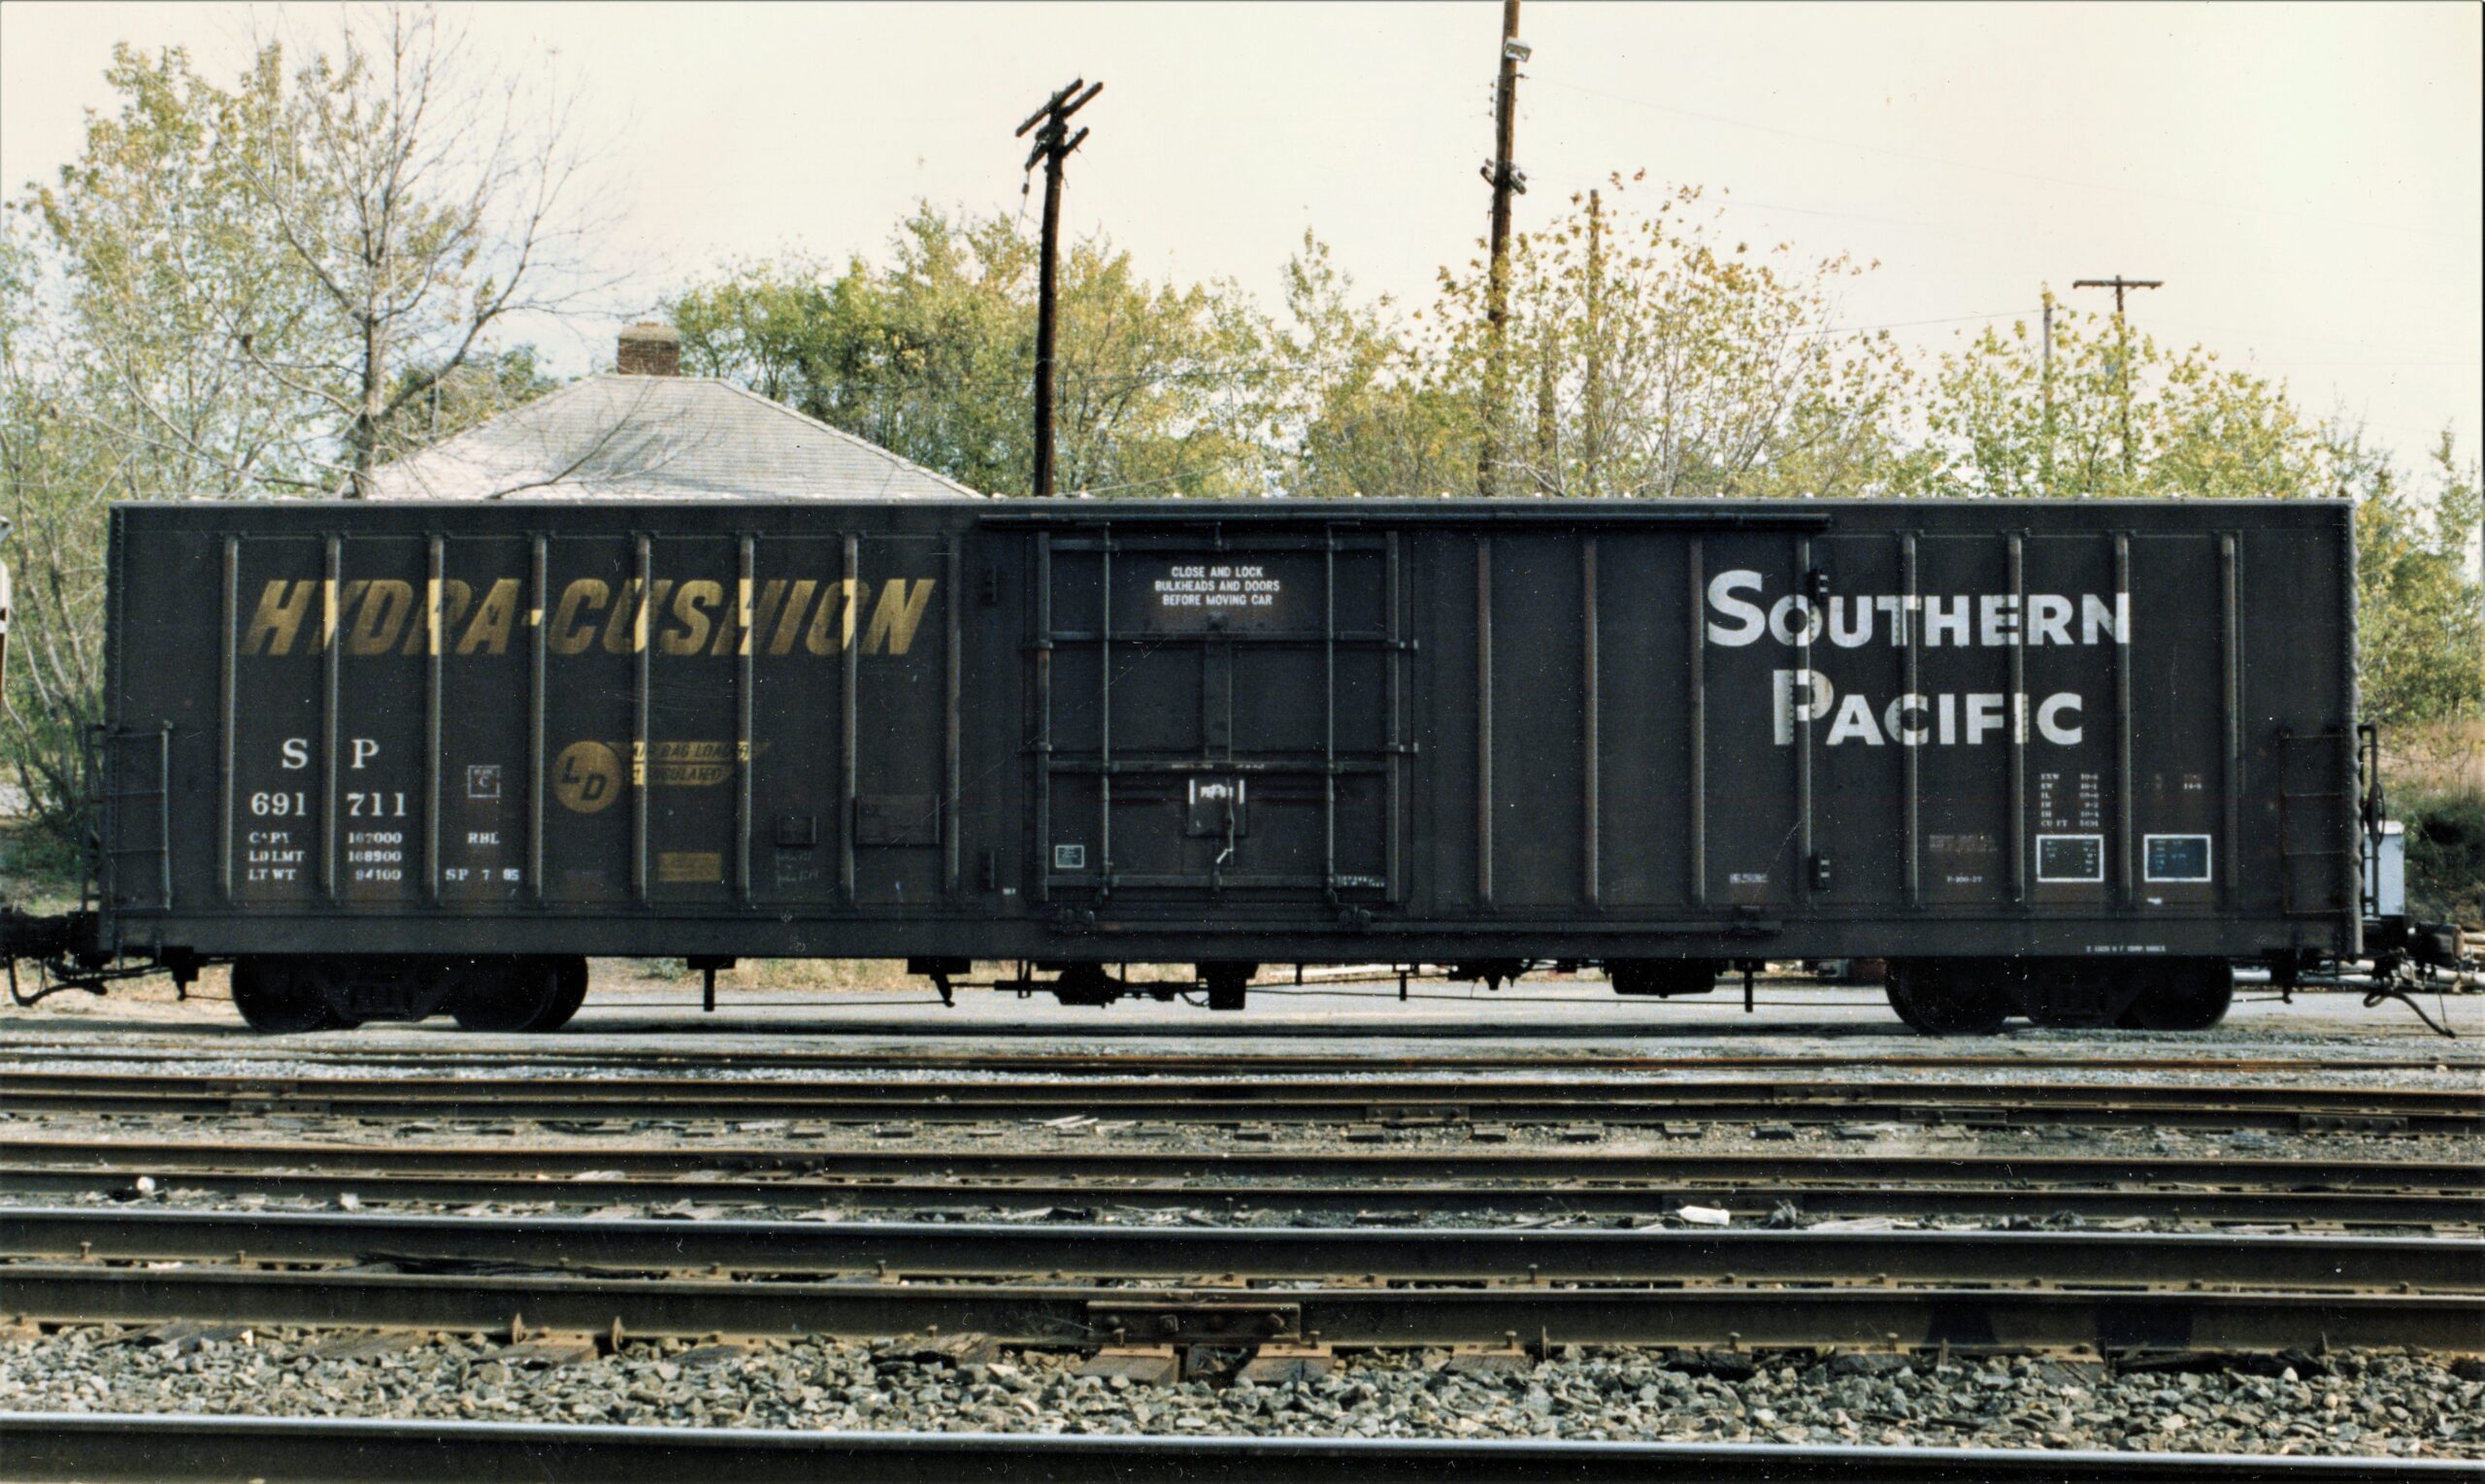 Southern Pacific Lines | Manchester, New Hampshire | 60 foot box car #691711 | October 1990 | Dan Marrone photograph